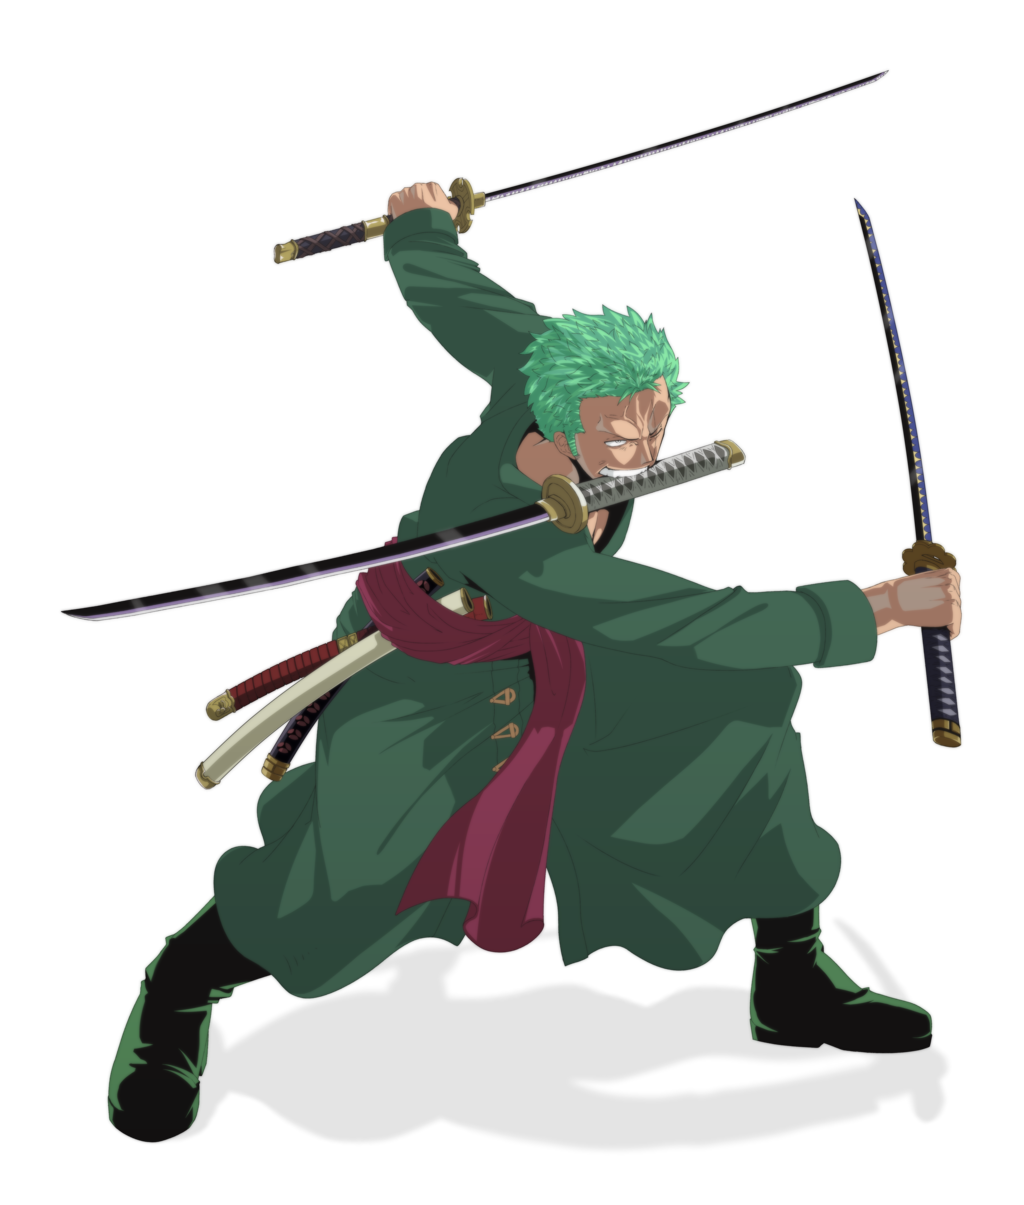 Download PNG image - One Piece Zoro PNG Transparent Image 